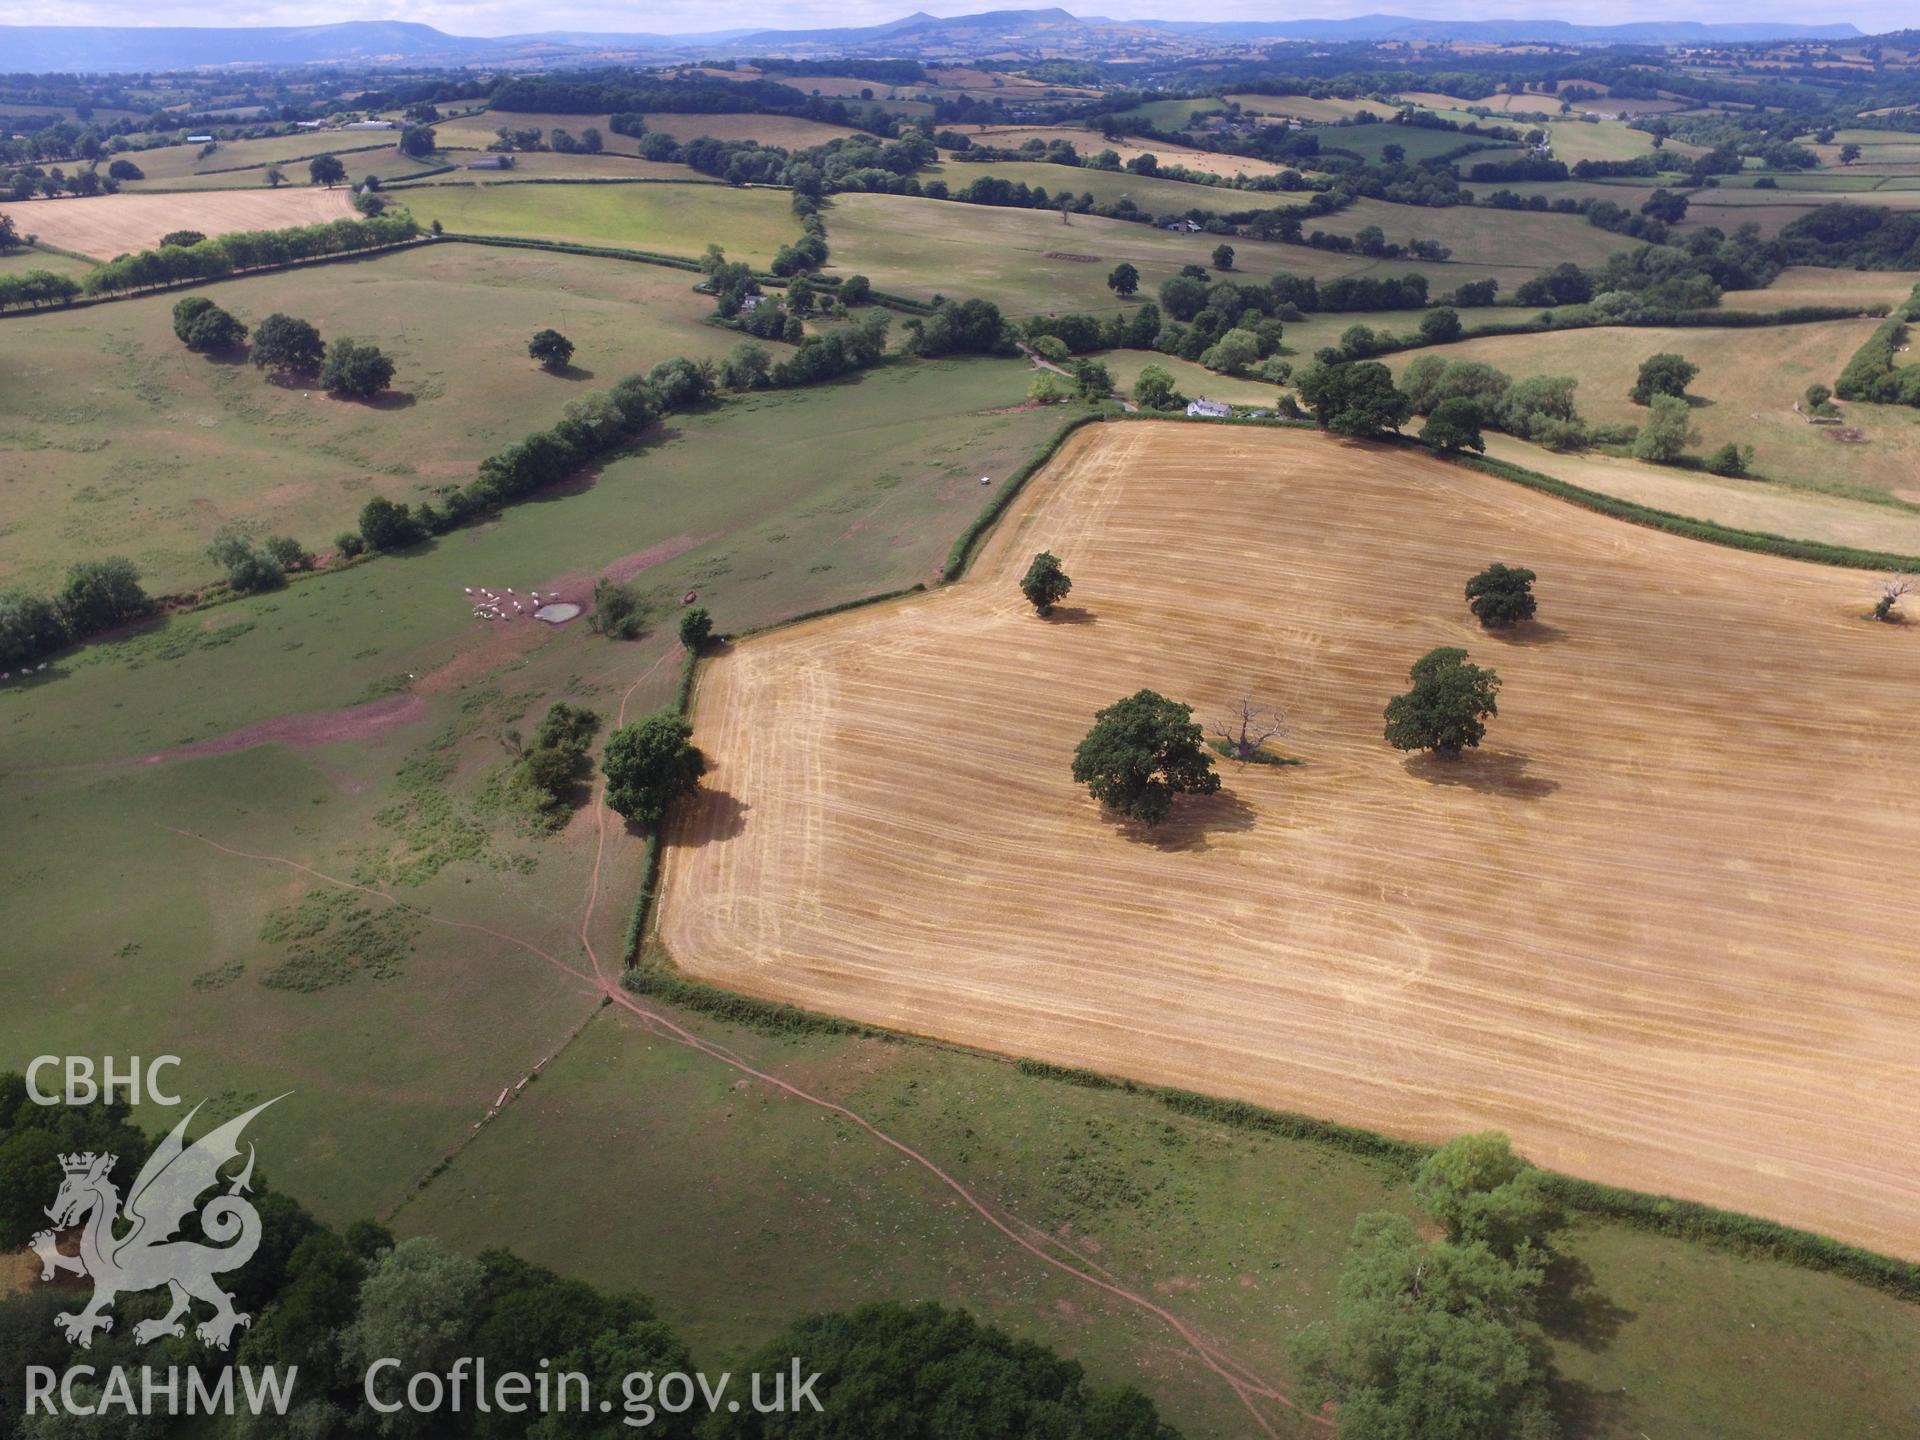 Site of the Cistercian Grace Dieu Abbey, near Monmouth. Colour photograph taken by Paul R. Davis on 22nd July 2018.